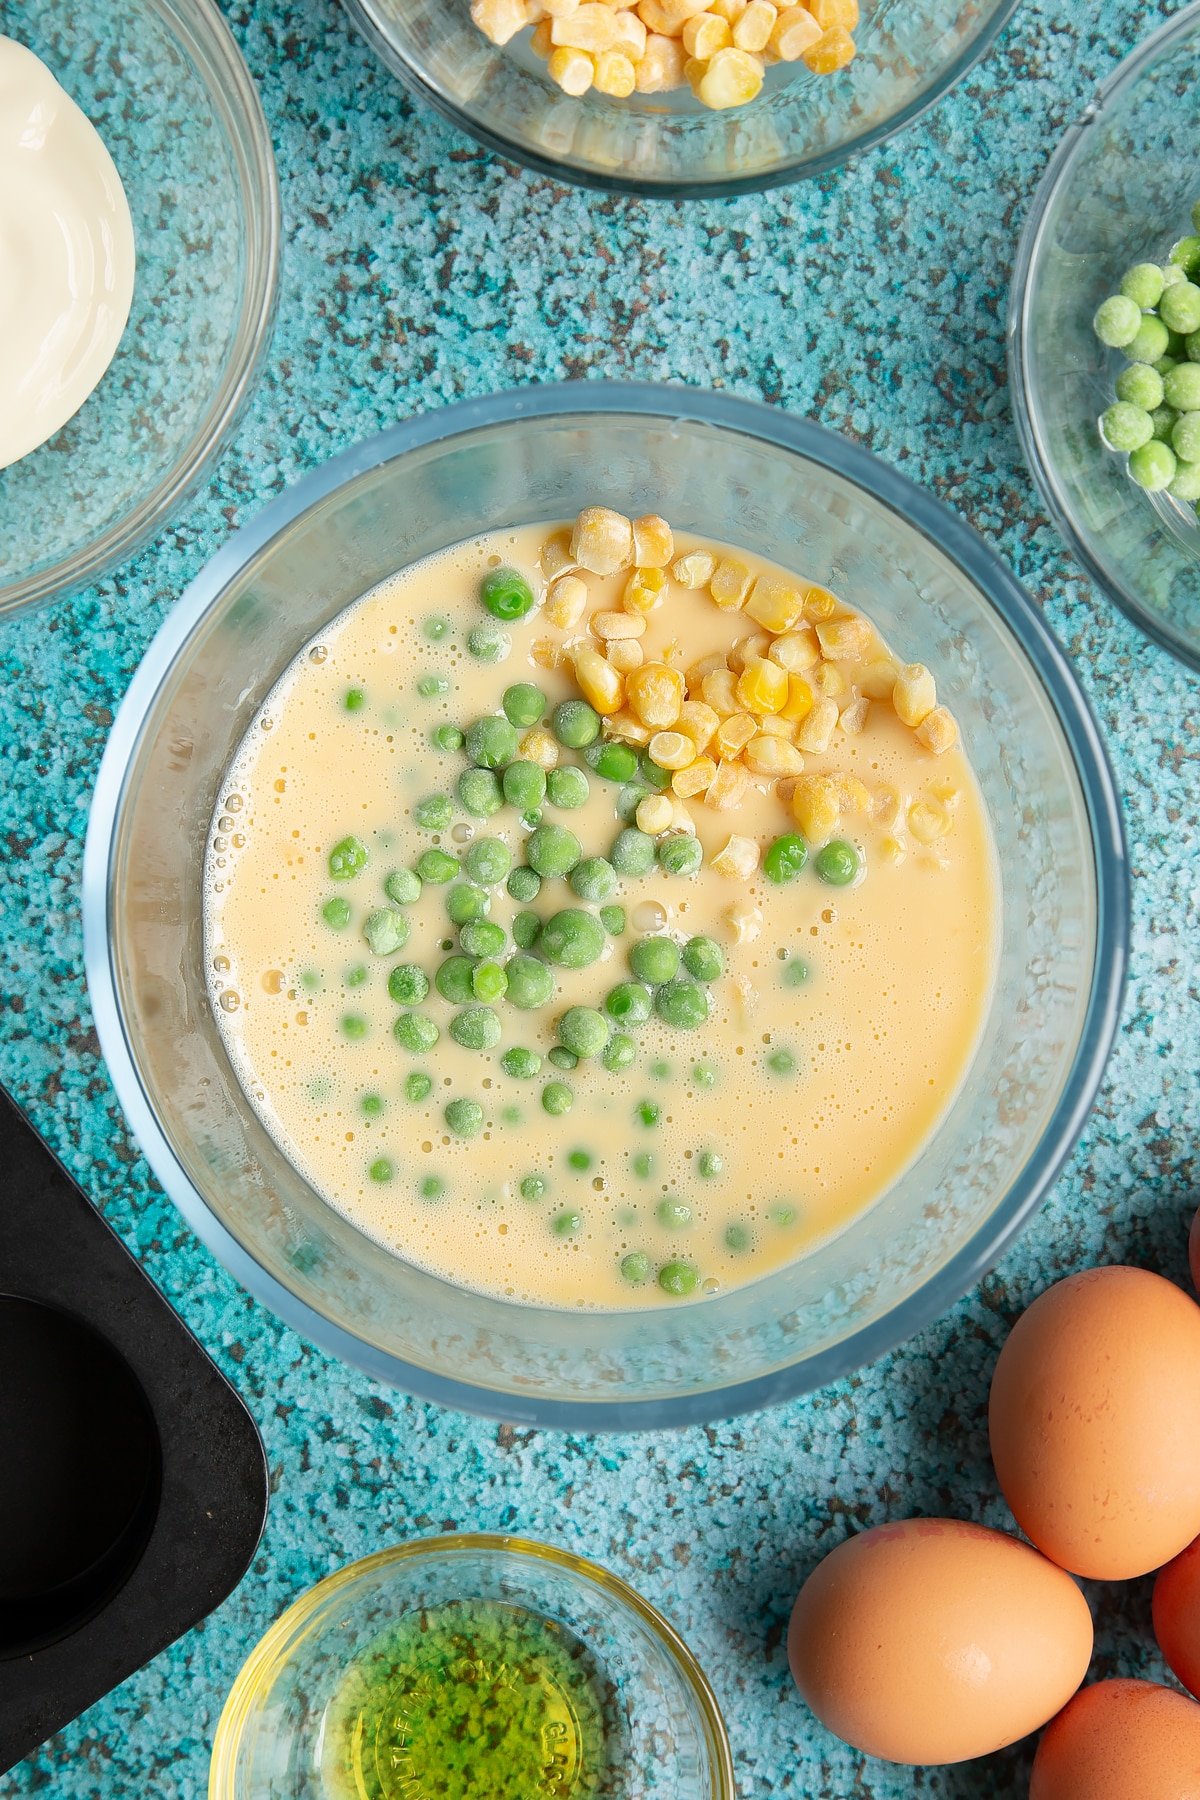 Eggs and cream cheese beaten together in a mixing bowl. Peas and sweetcorn are shown on top. Ingredients to make mini vegetable frittatas surround the bowl.